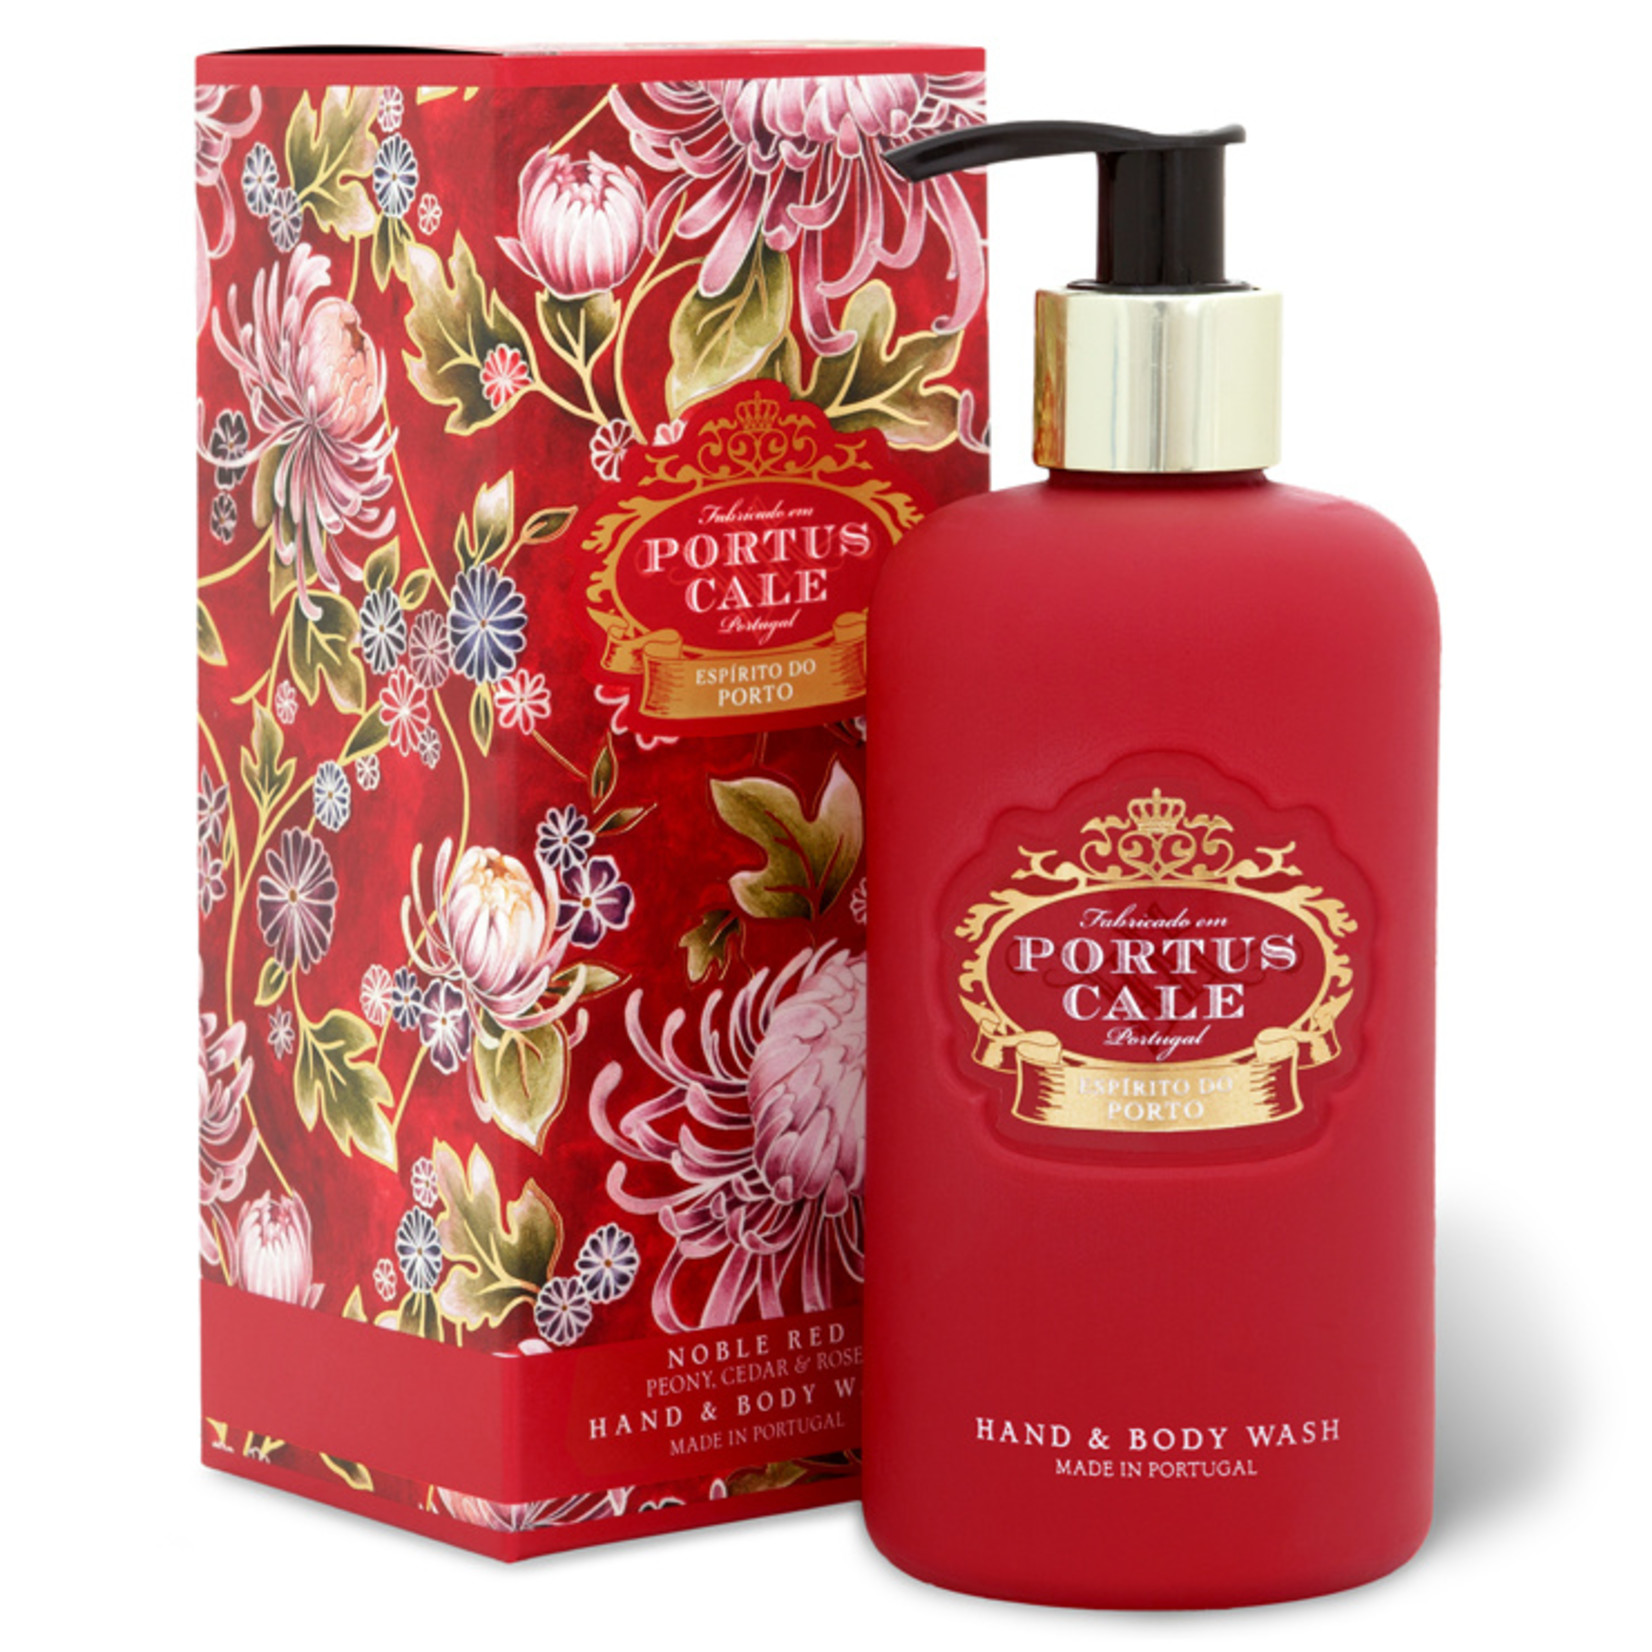 Portus Cale Hand & Body Wash Noble Red